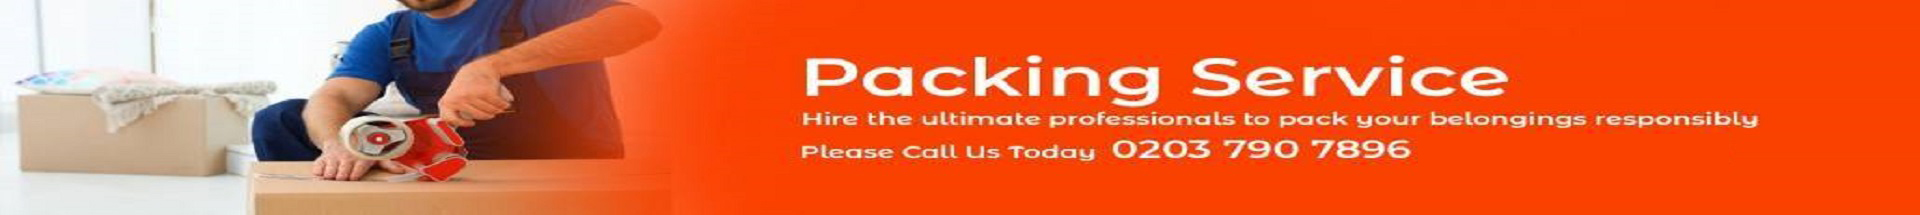 Packing Service London